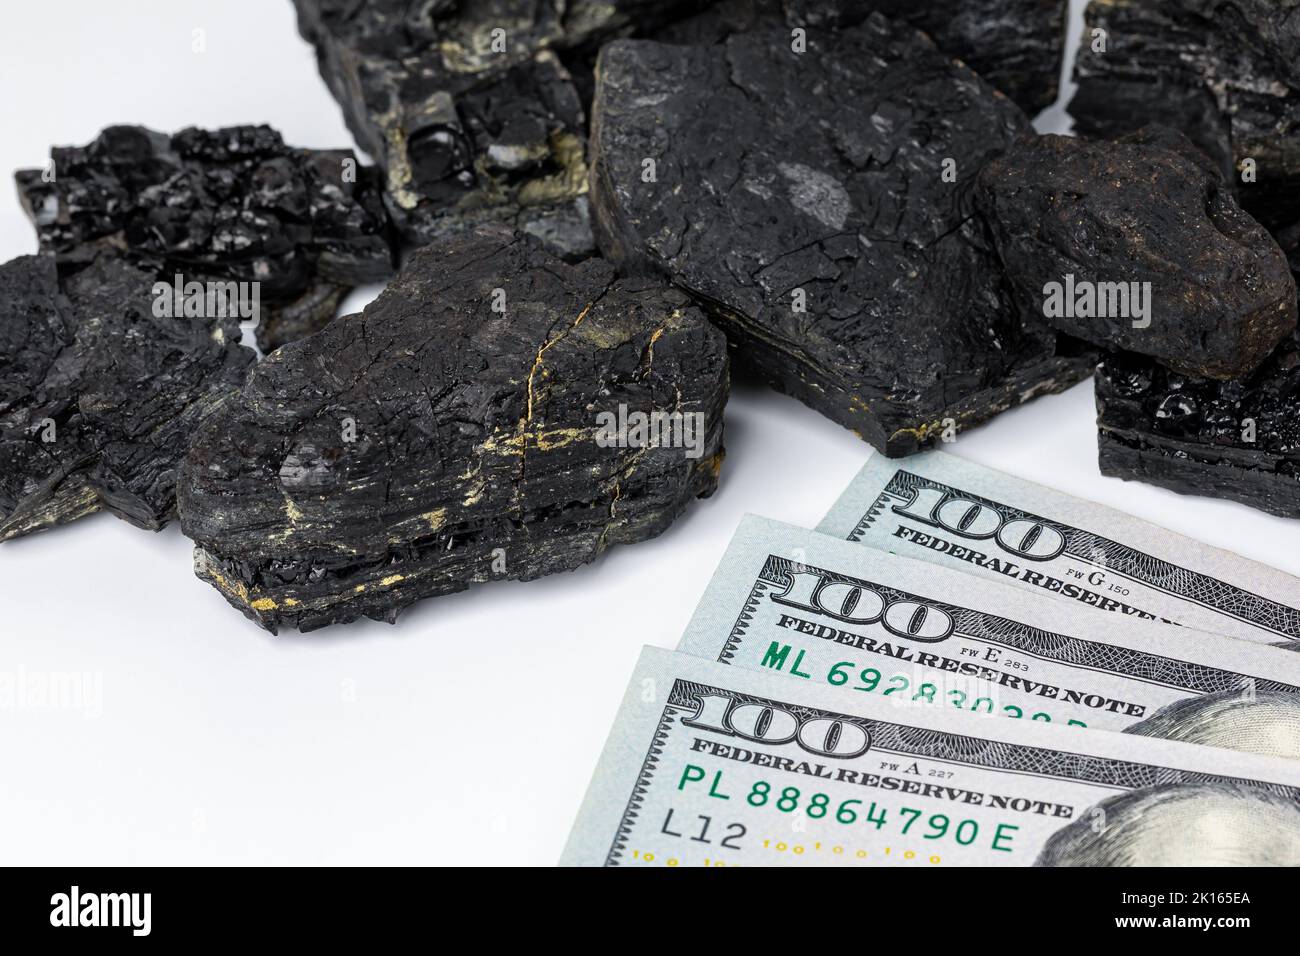 Black coal lumps with cash money. Fossil fuel, air pollution and coal mining industry concept. Stock Photo